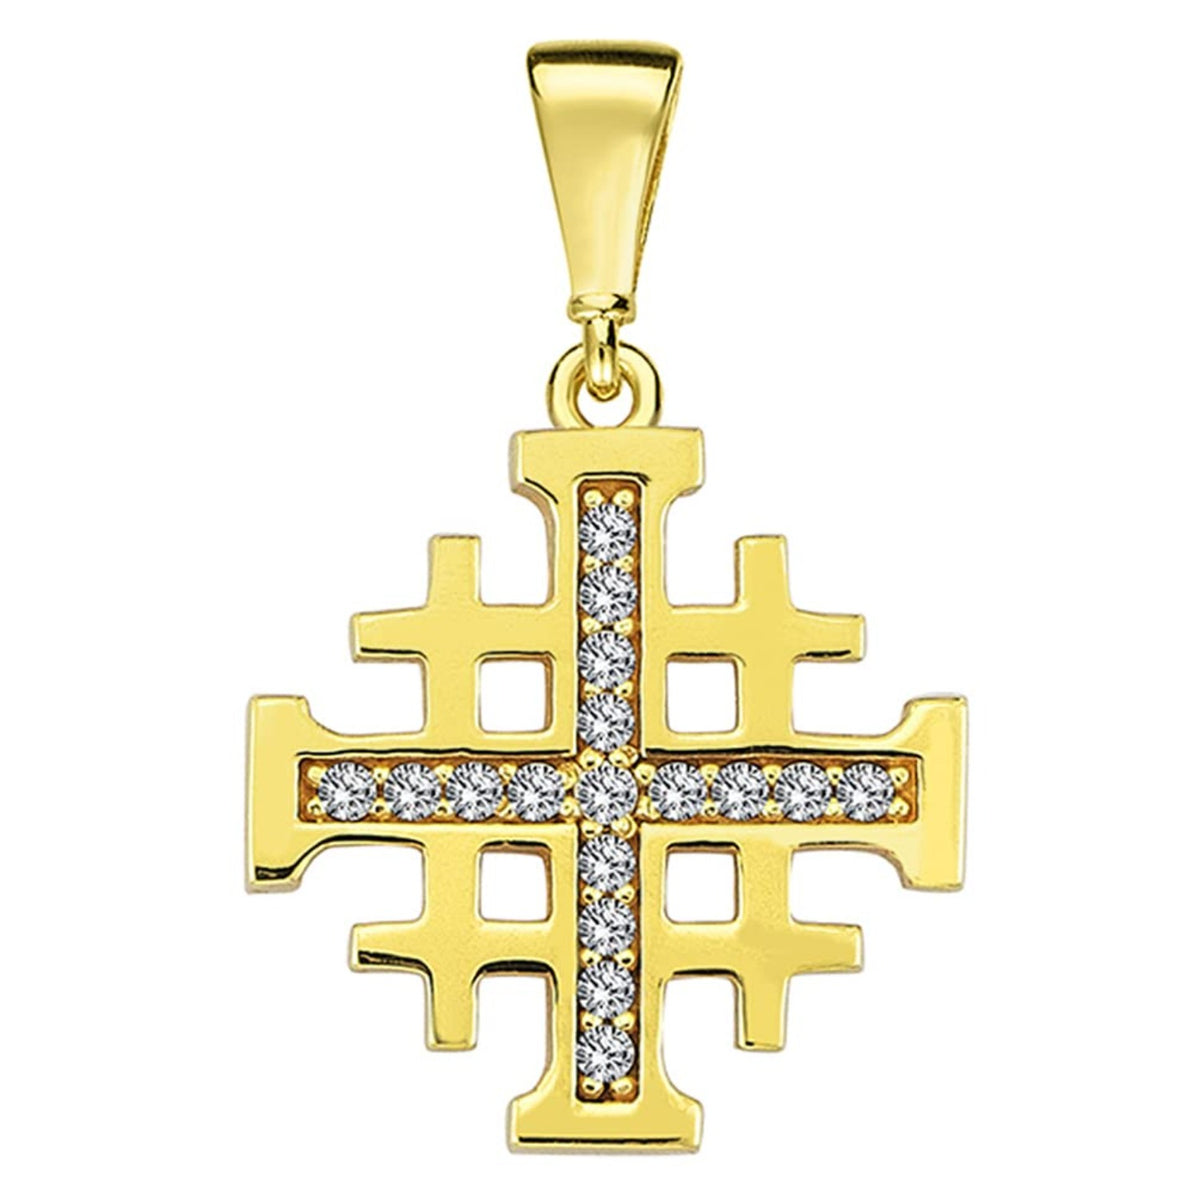 Solid 14k Yellow Gold Religious Crusaders Jerusalem Cross Pendant with Cubic-Zirconia